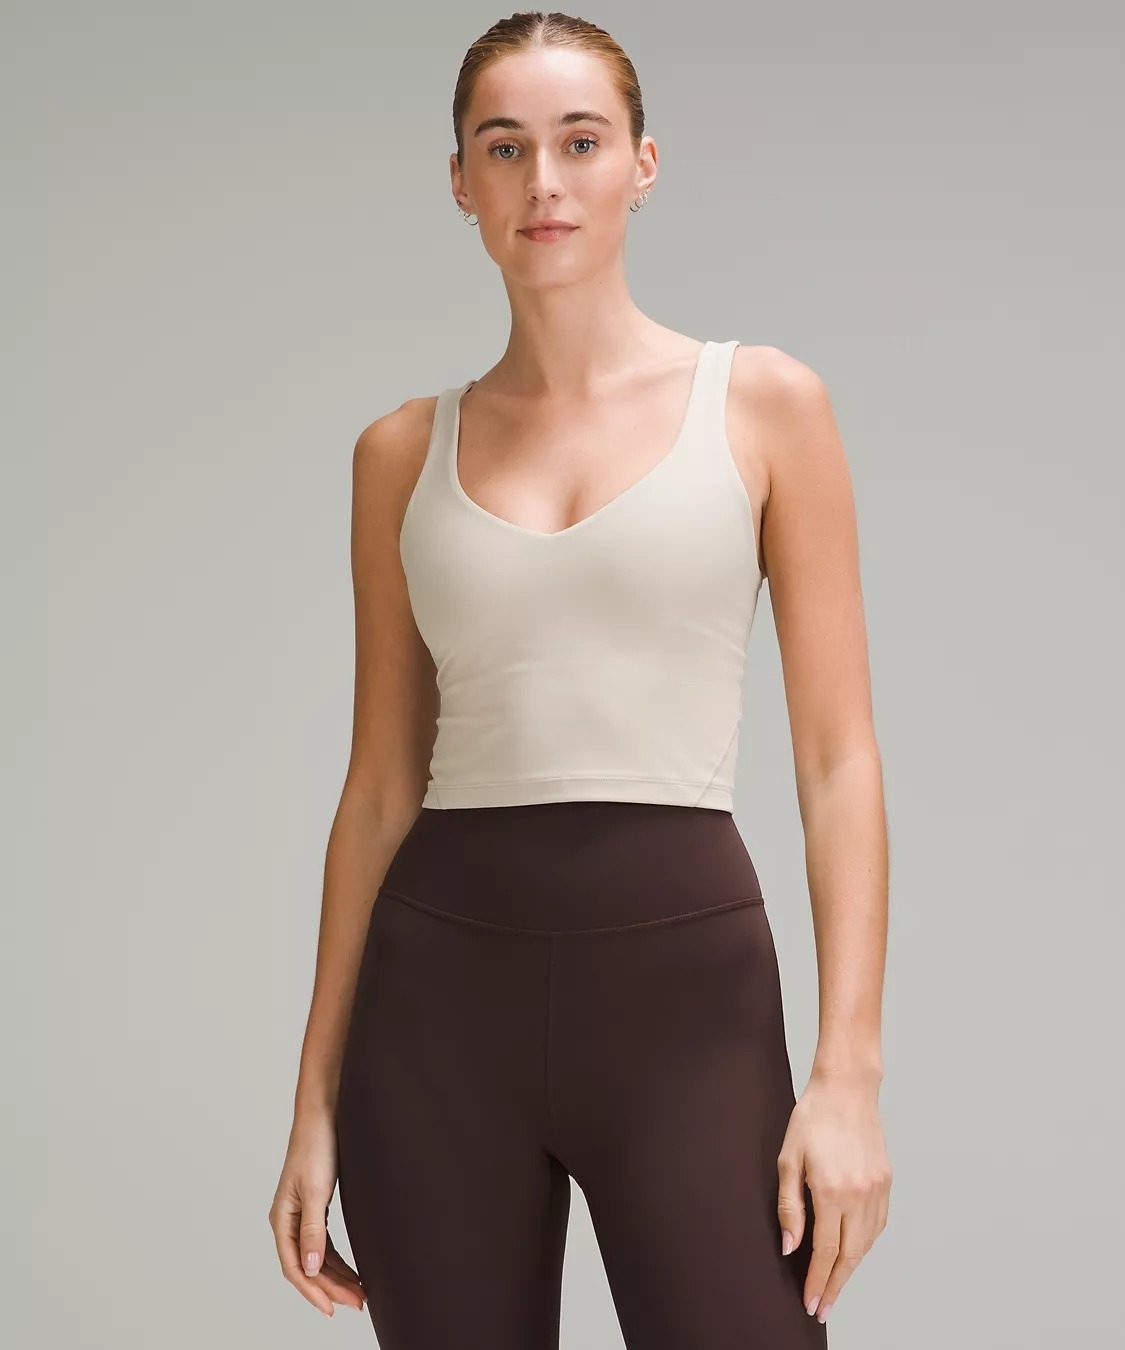 Model in white Align cropped tank top and brown leggings